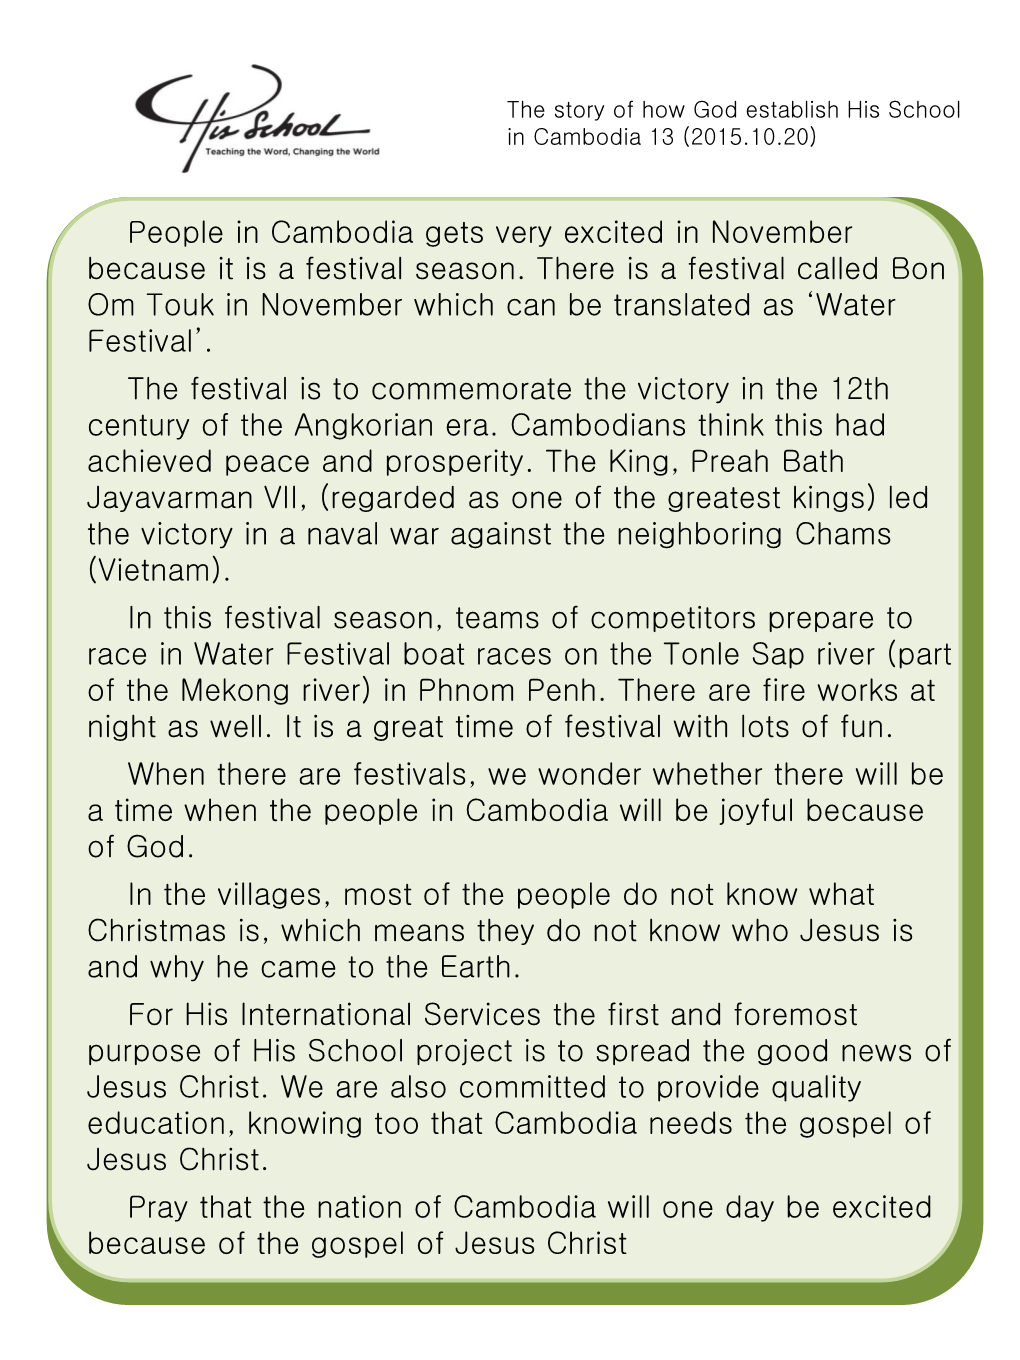 People in Cambodia Gets Very Excited in November Because It Is a Festival Season